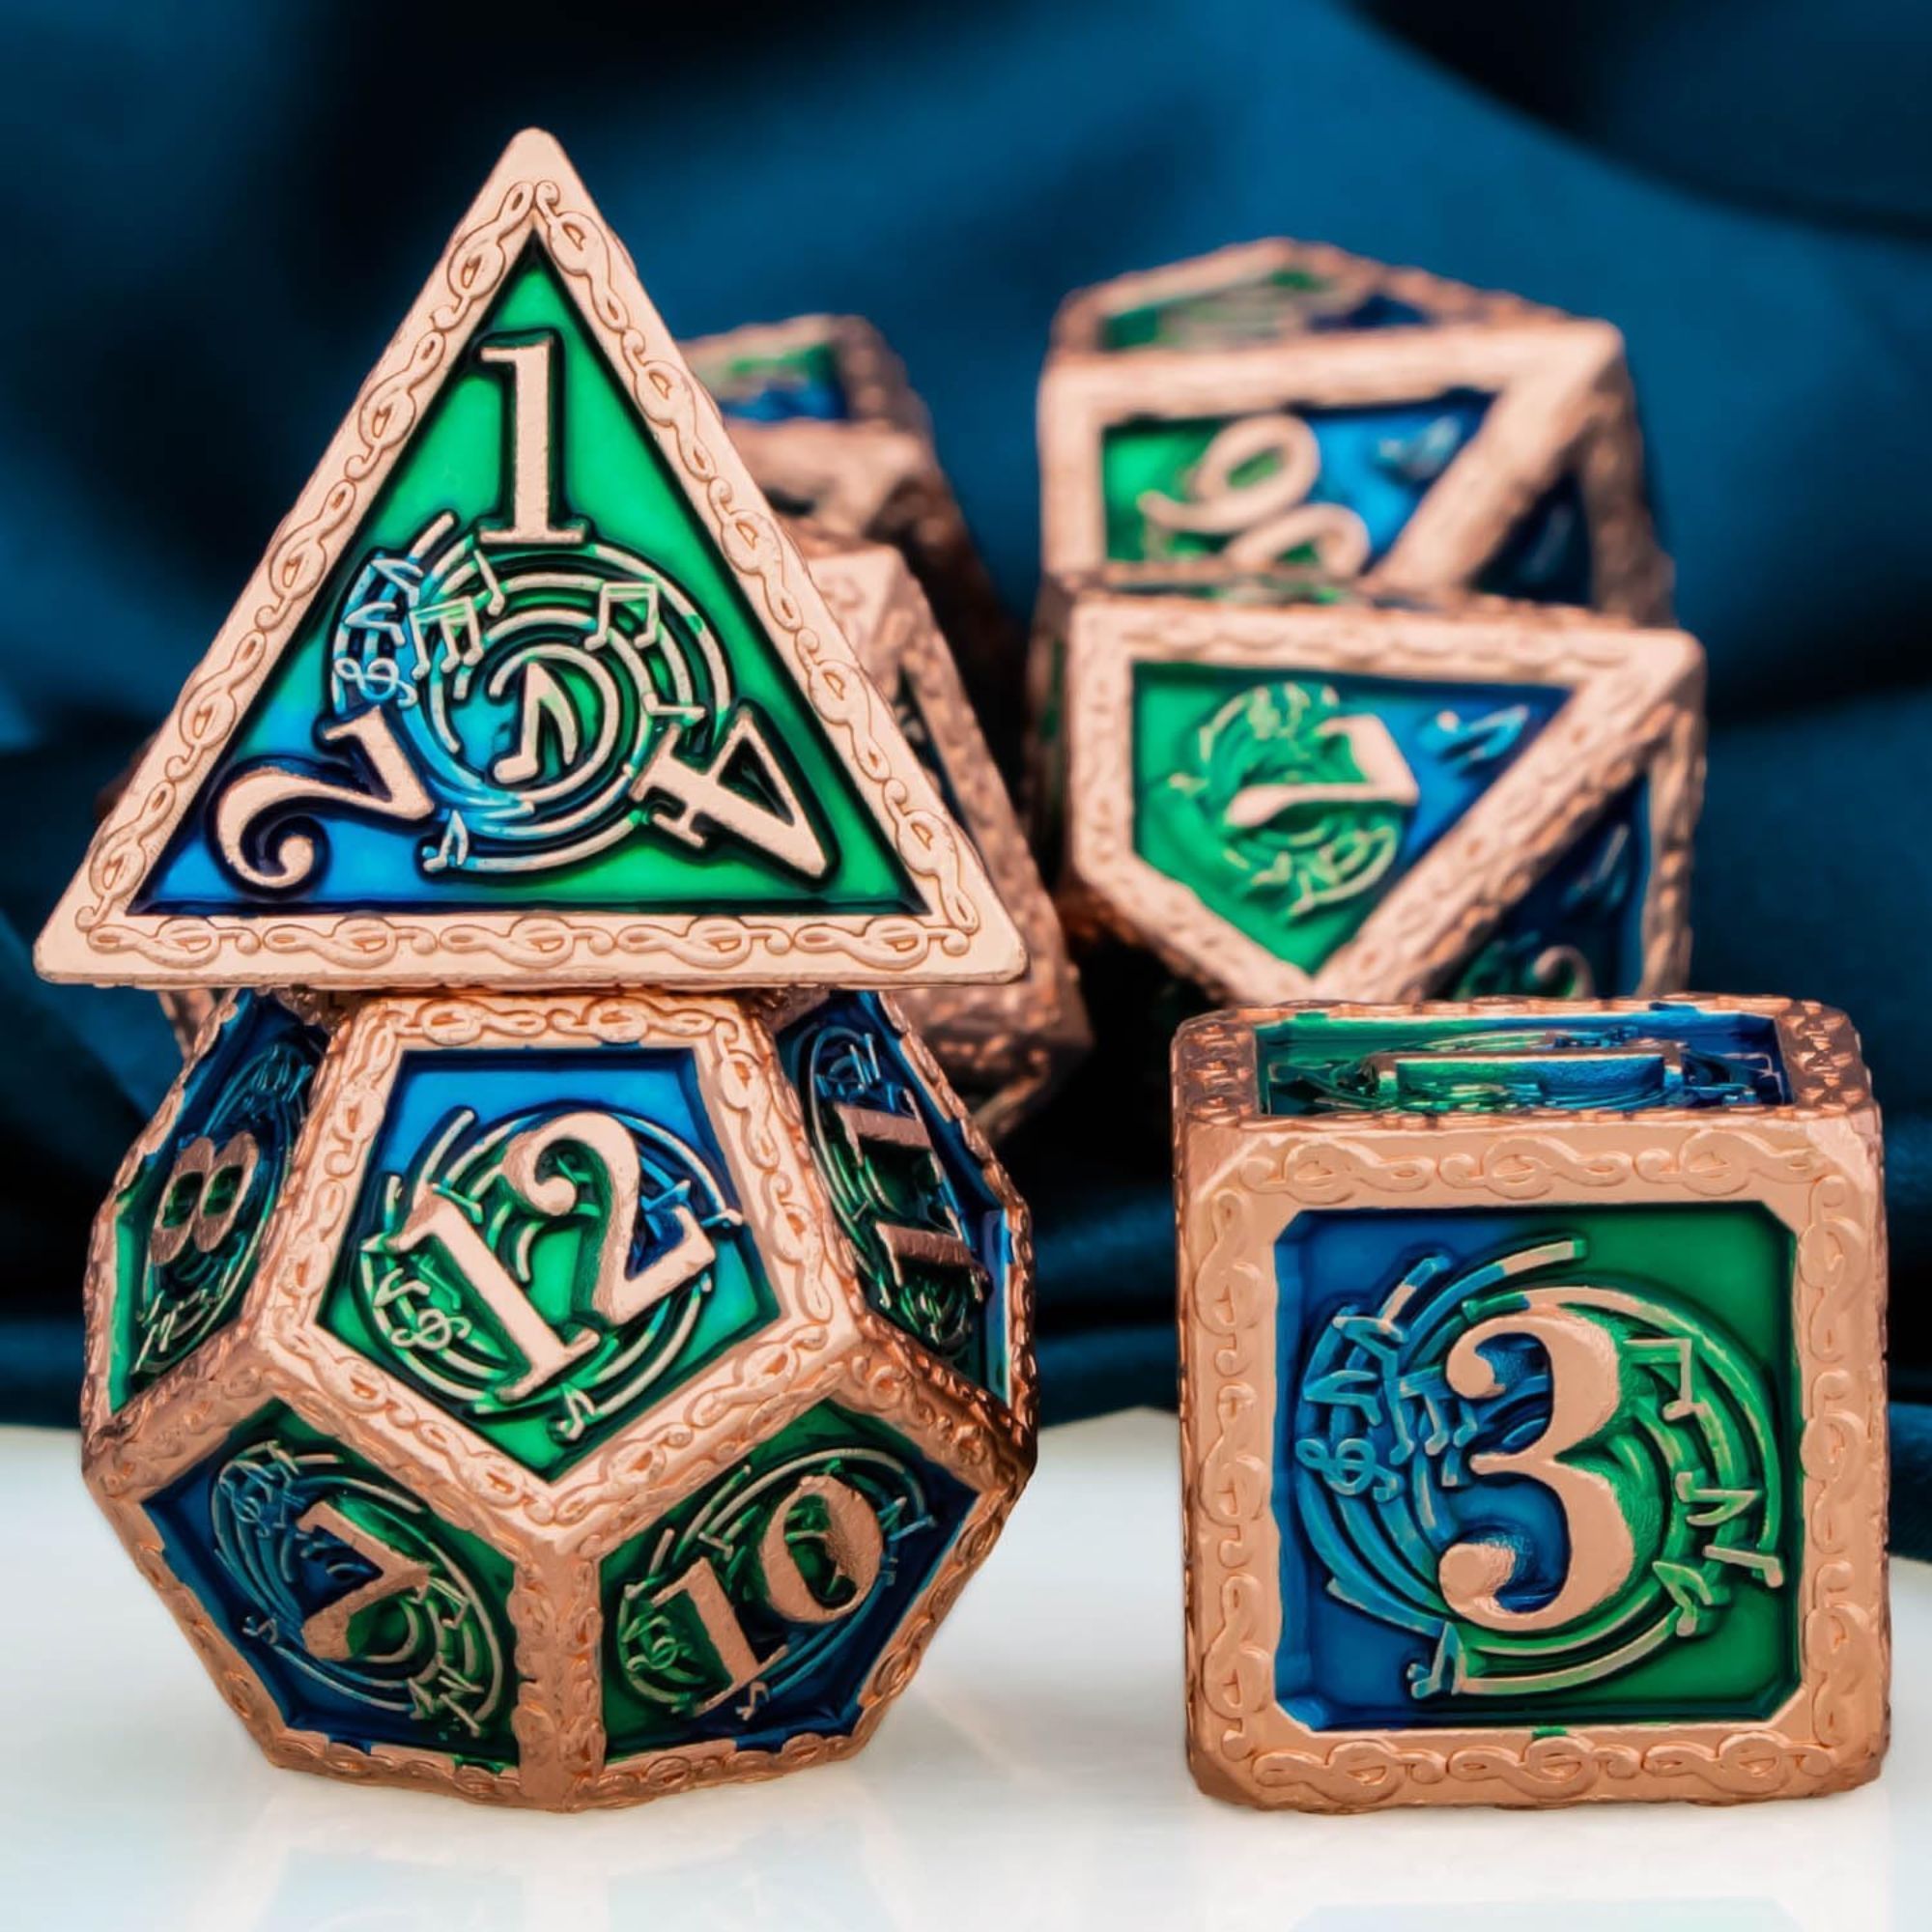 Product still of the ARUOHHA D&D Music Dice Set on a white background